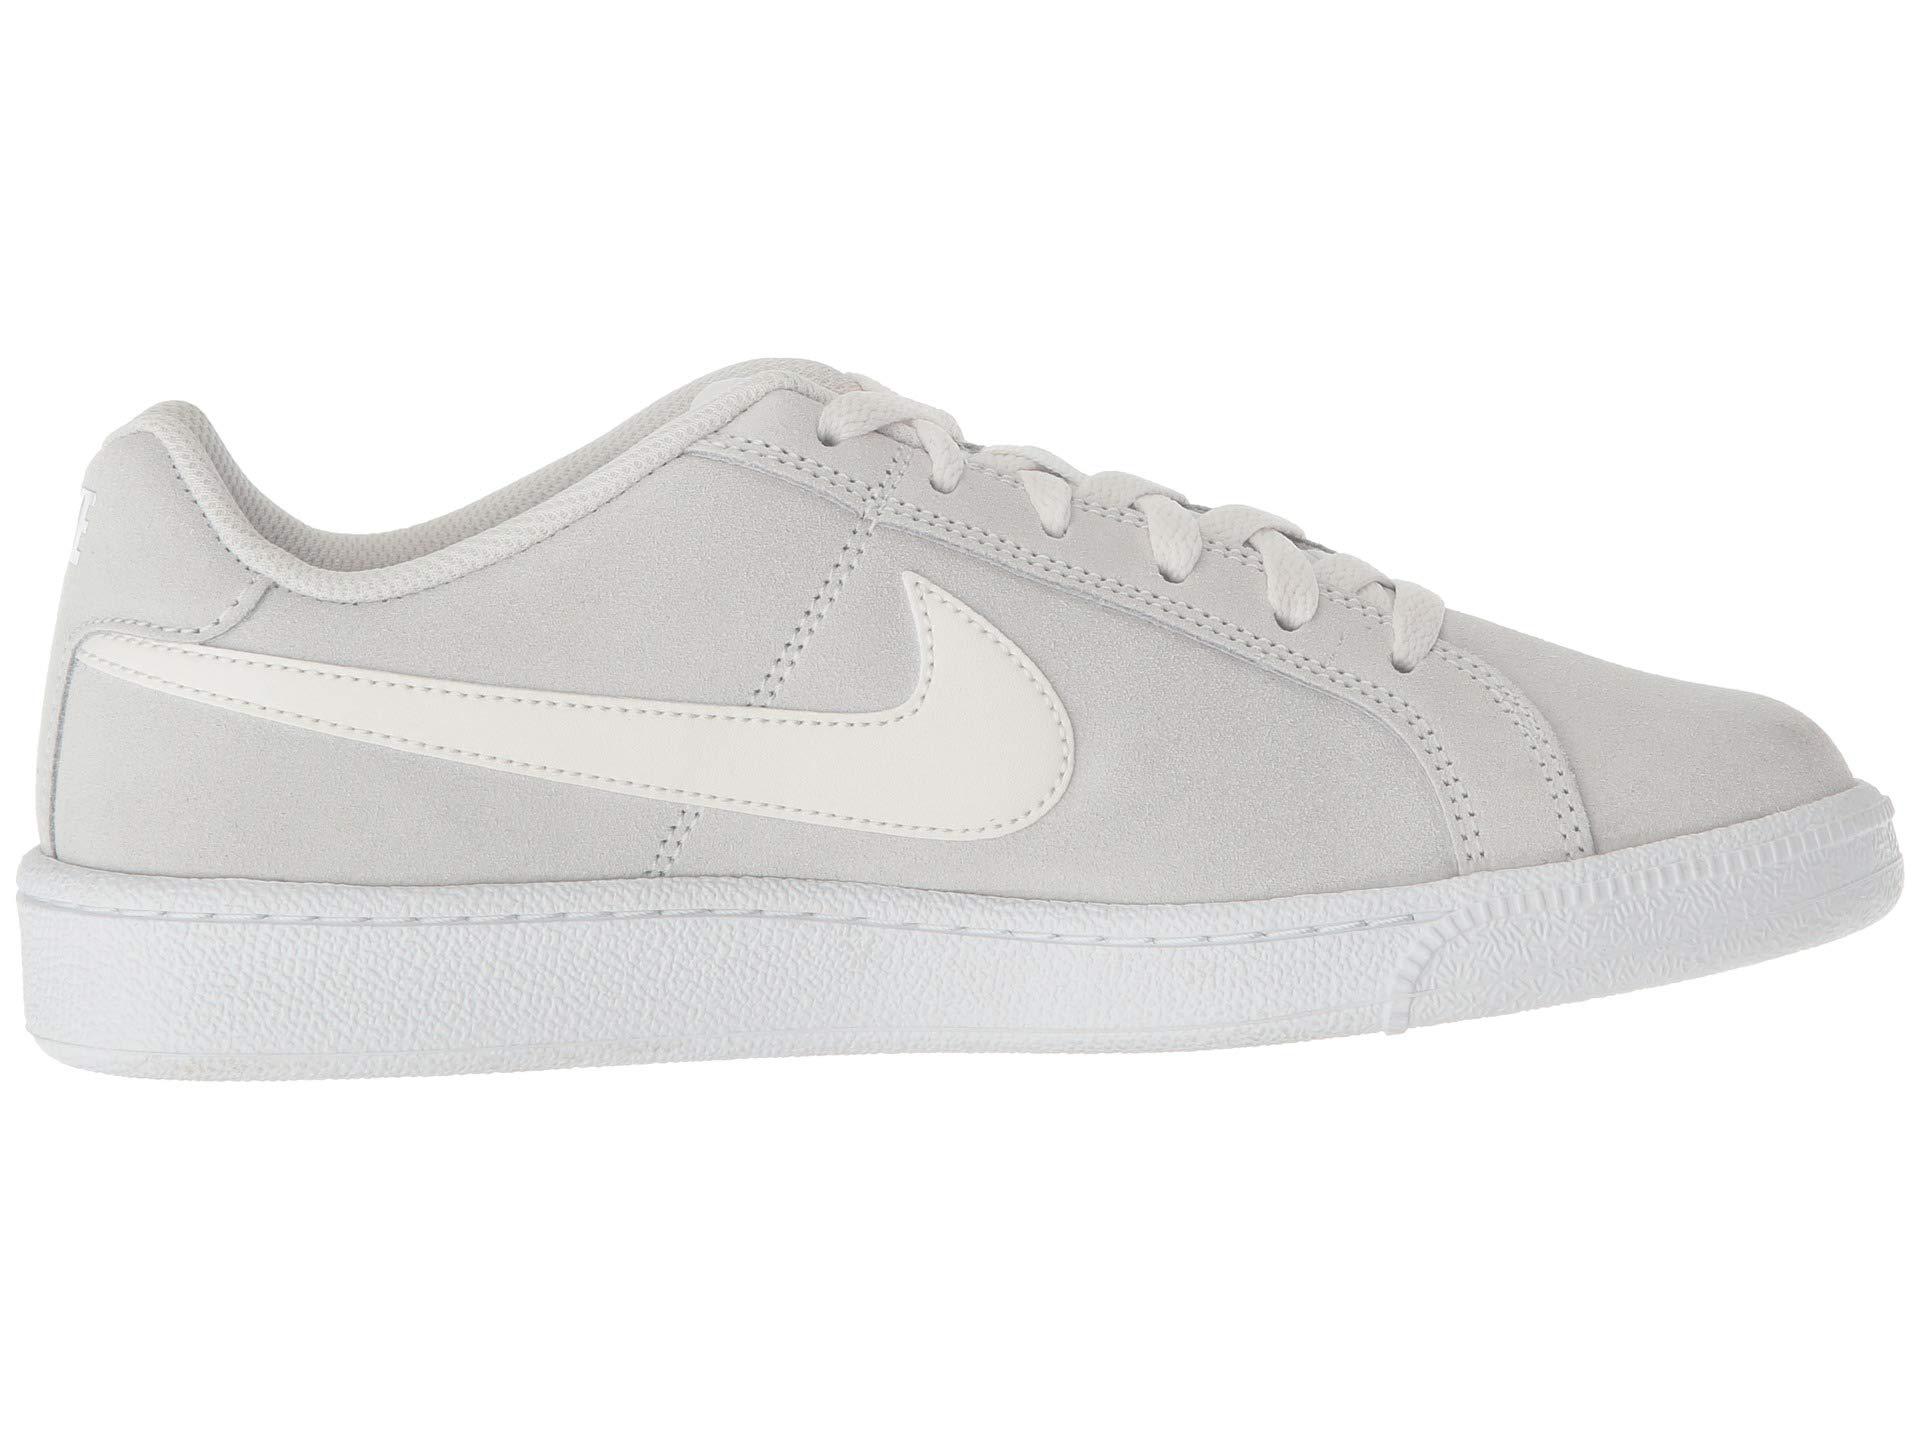 Nike Court Royale Suede in White | Lyst